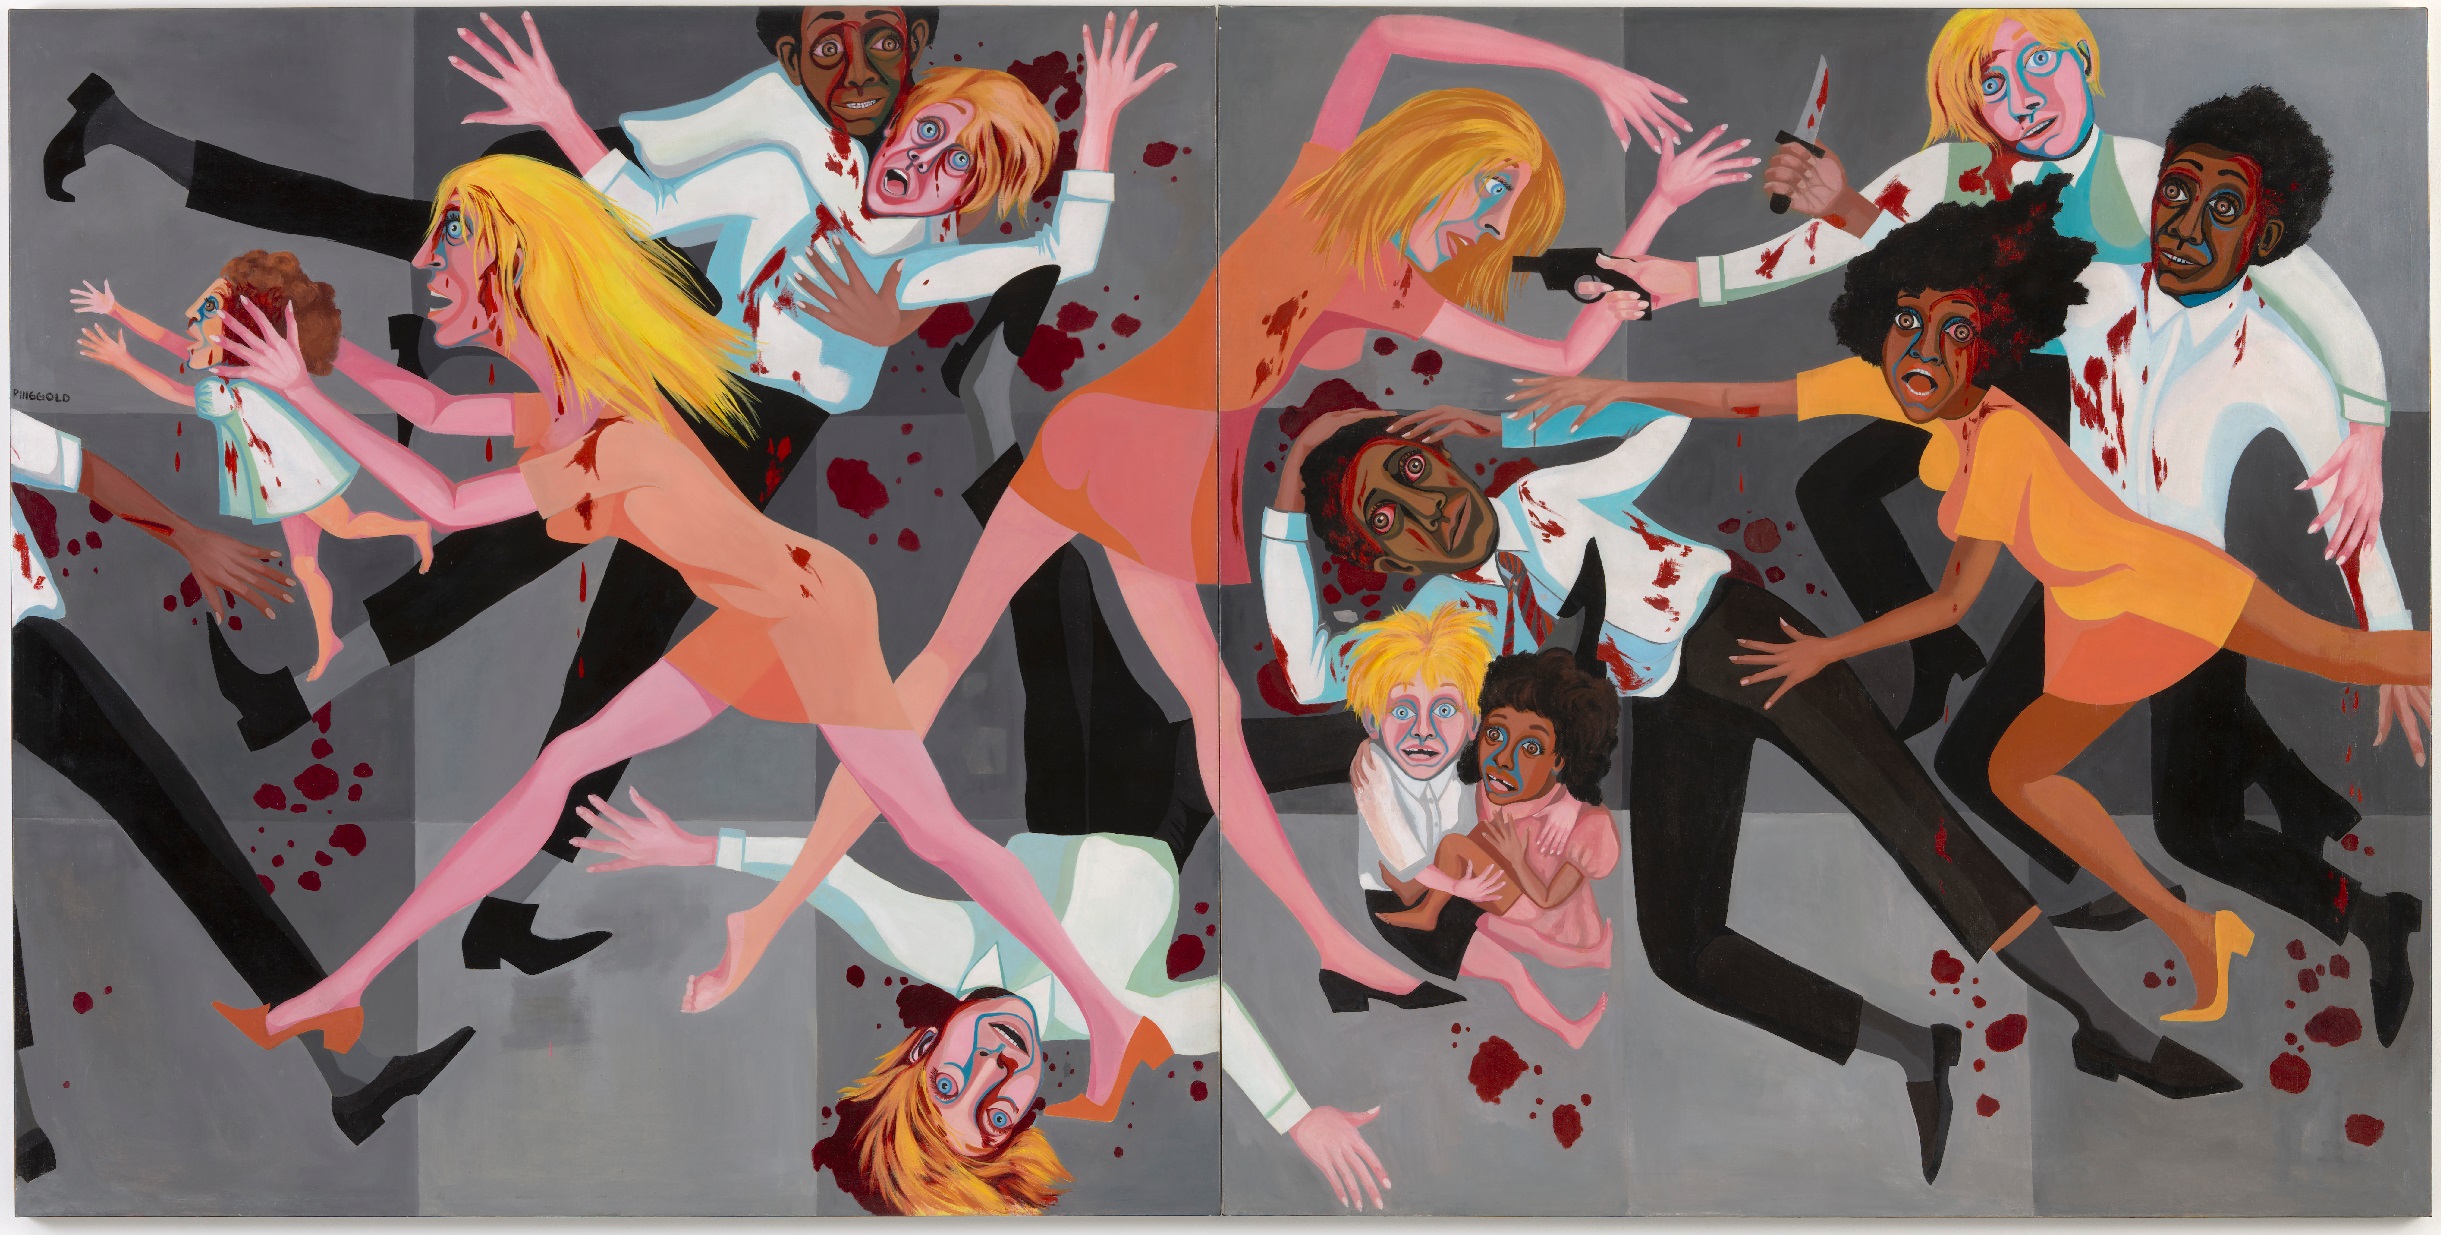 Faith Ringgold, American People Series #20: Die, 1967, Huile sur toile, deux panneaux 182,9 x 365,8 cm, . © Faith Ringgold / ARS, NY and DACS, London, courtesy  ACA Galleries, New York 2022. Digital Image © The Museum of  Modern Art/Licensed by SCALA / Art Resource